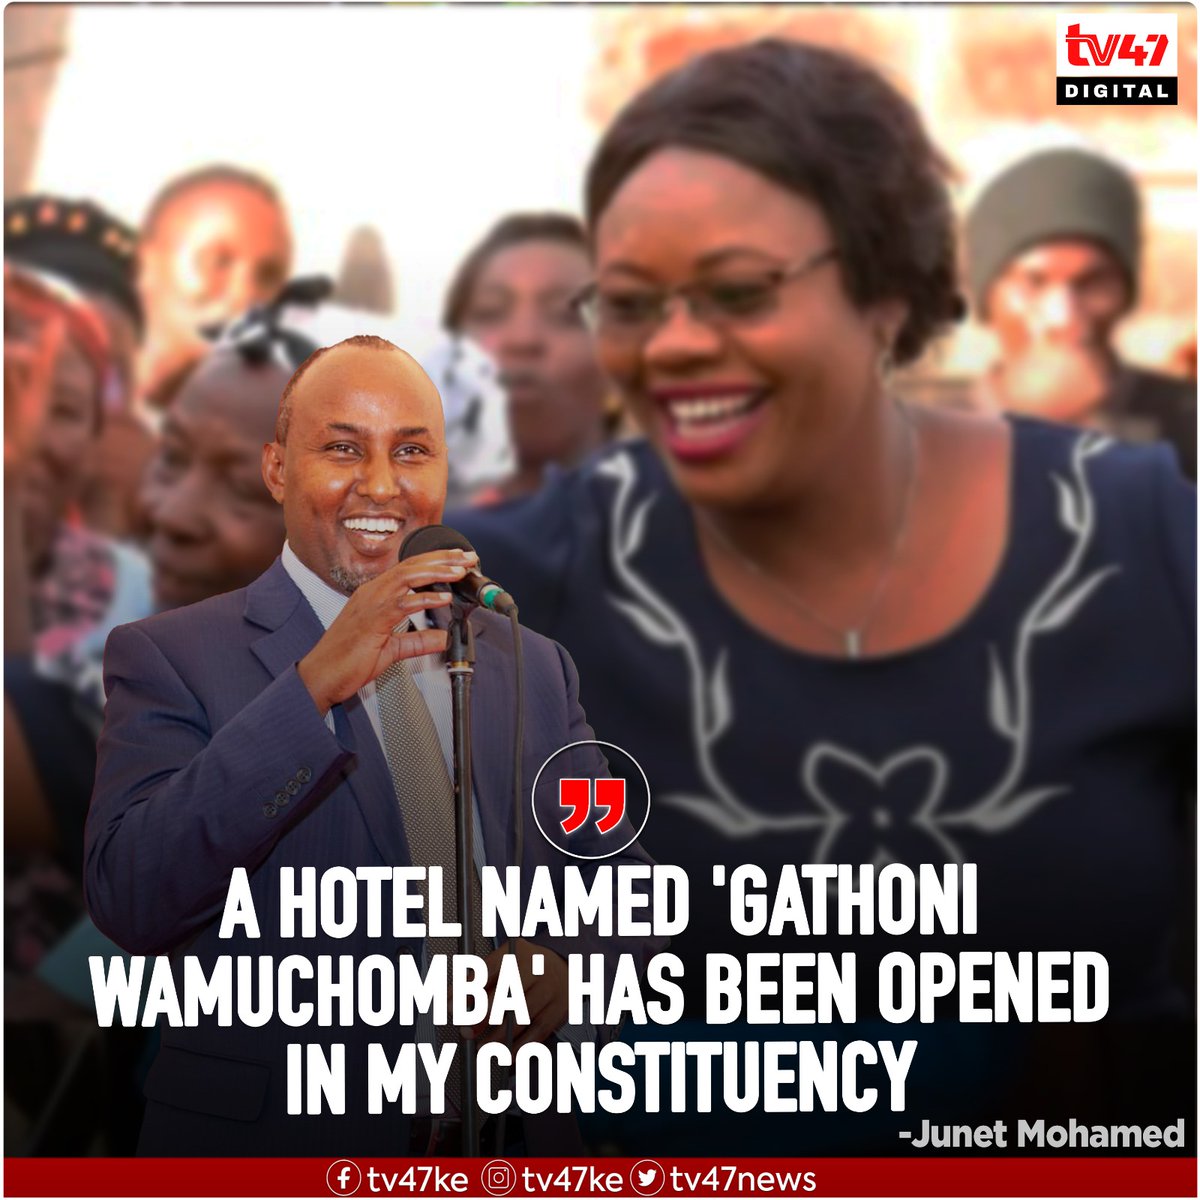 Kenyans, who is your MP, did she/he vote yes on the 16% VAT?
Junet says Wamuchomba has gained Favour from Kenyans across the country for 'standing with them'.

Ndii Mpyaro Winnie Odinga President Ruto Sugoi Azimio MPs Moses Kuria Miguna Miguna